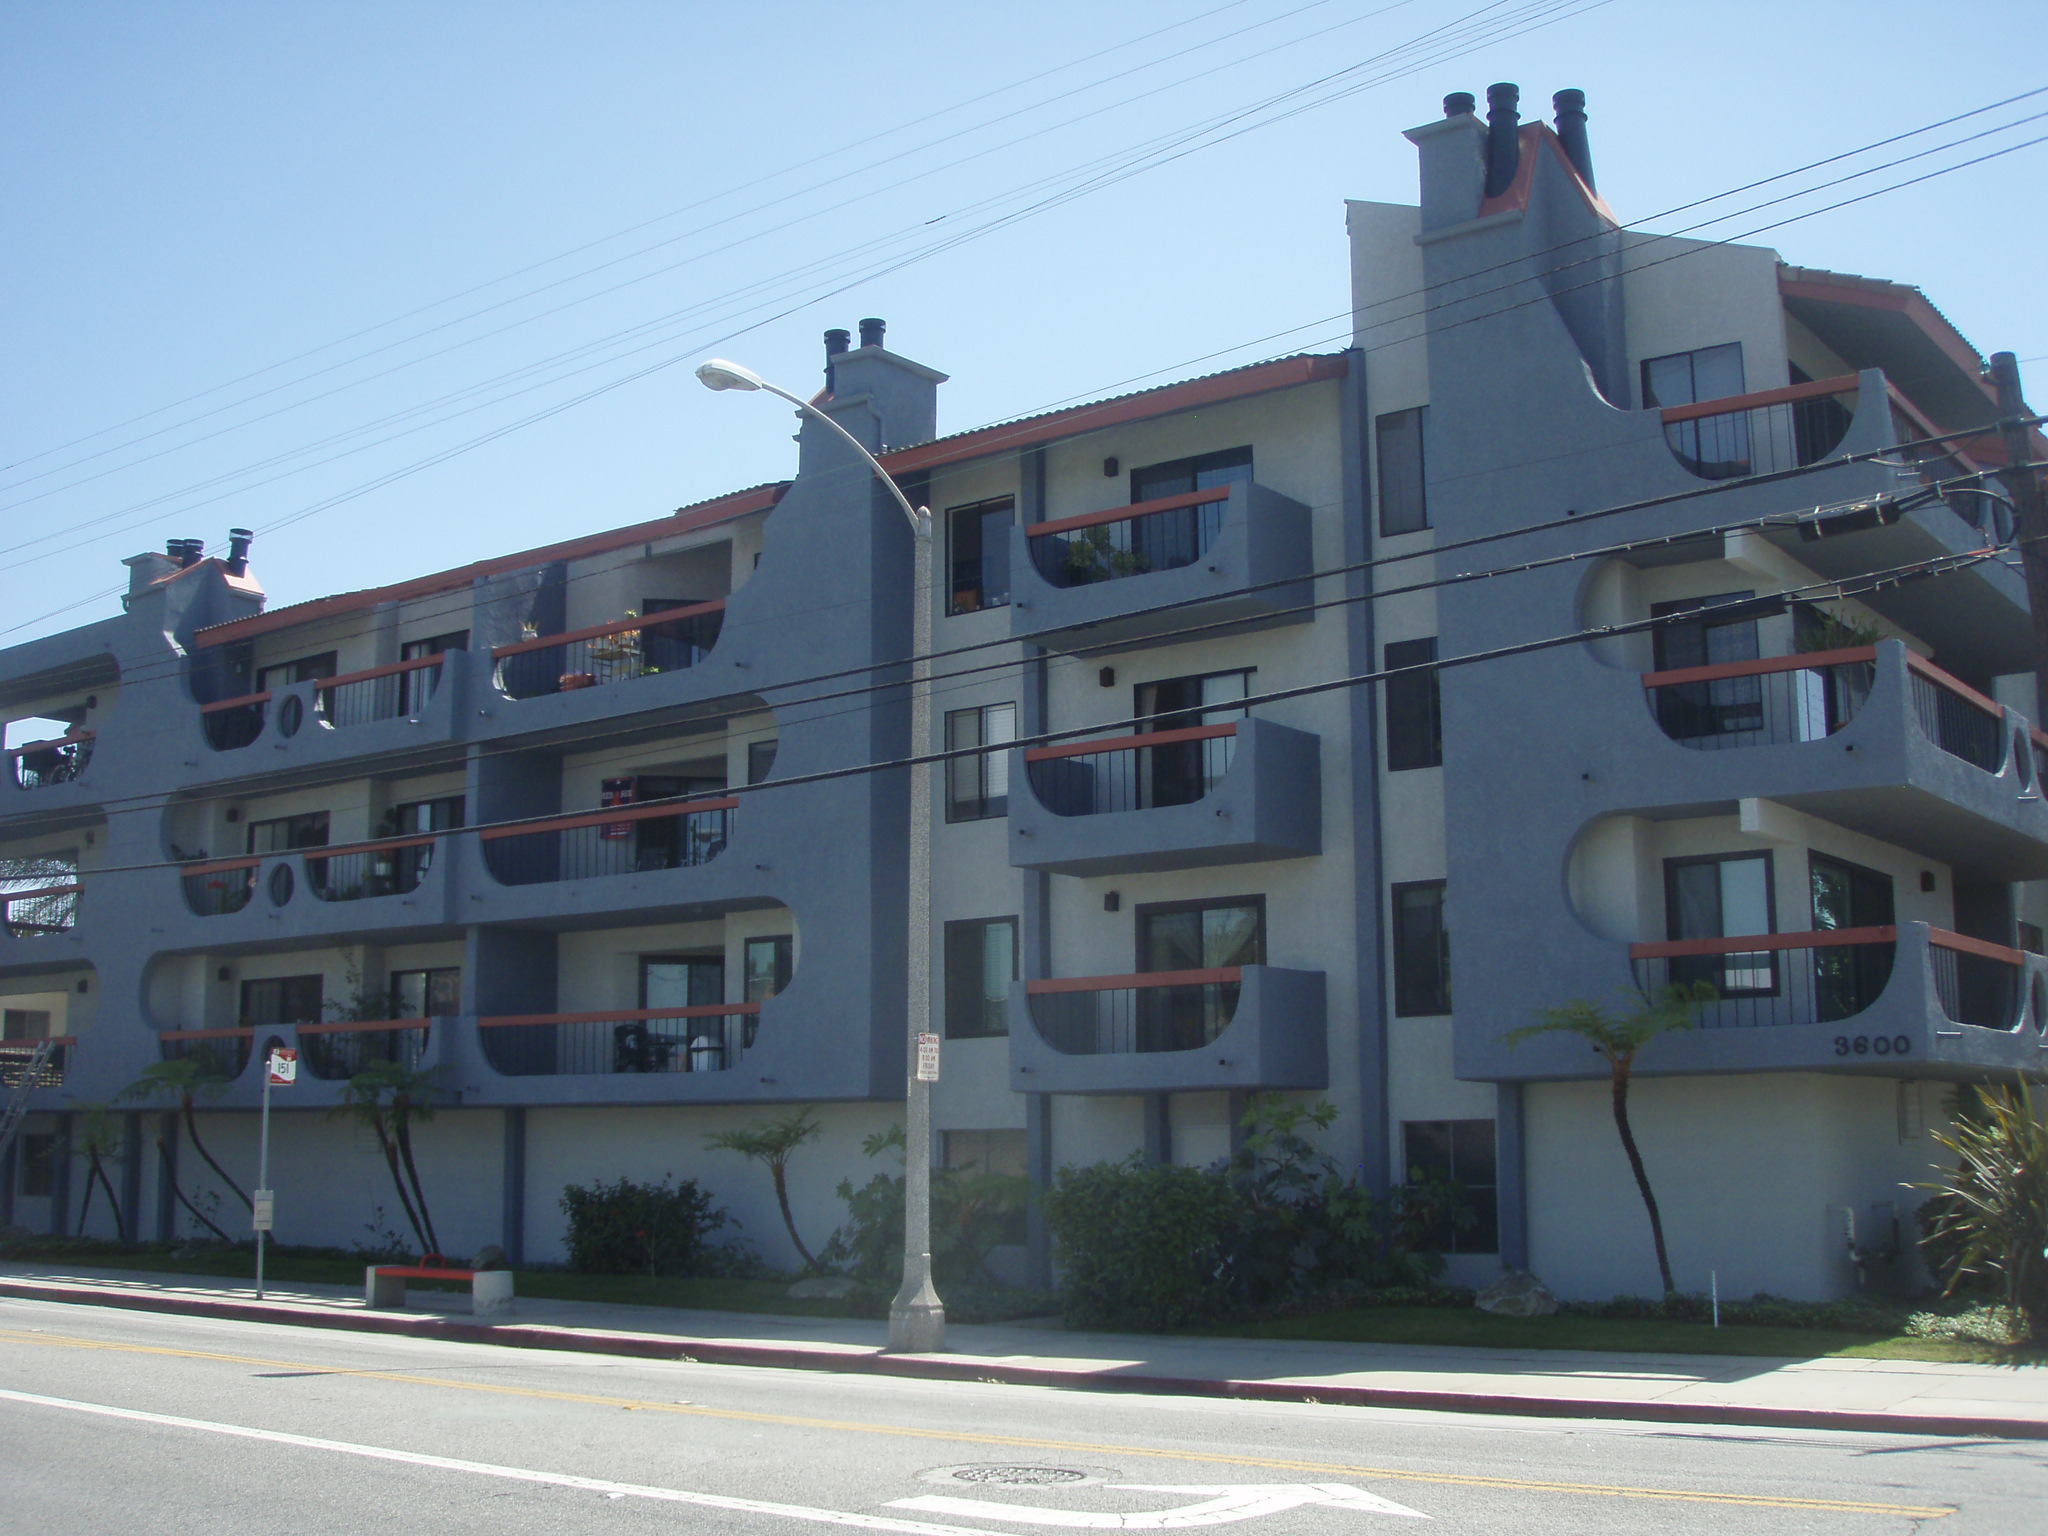 Commercial Condo painting by CertaPro painters in Huntington Beach, CA